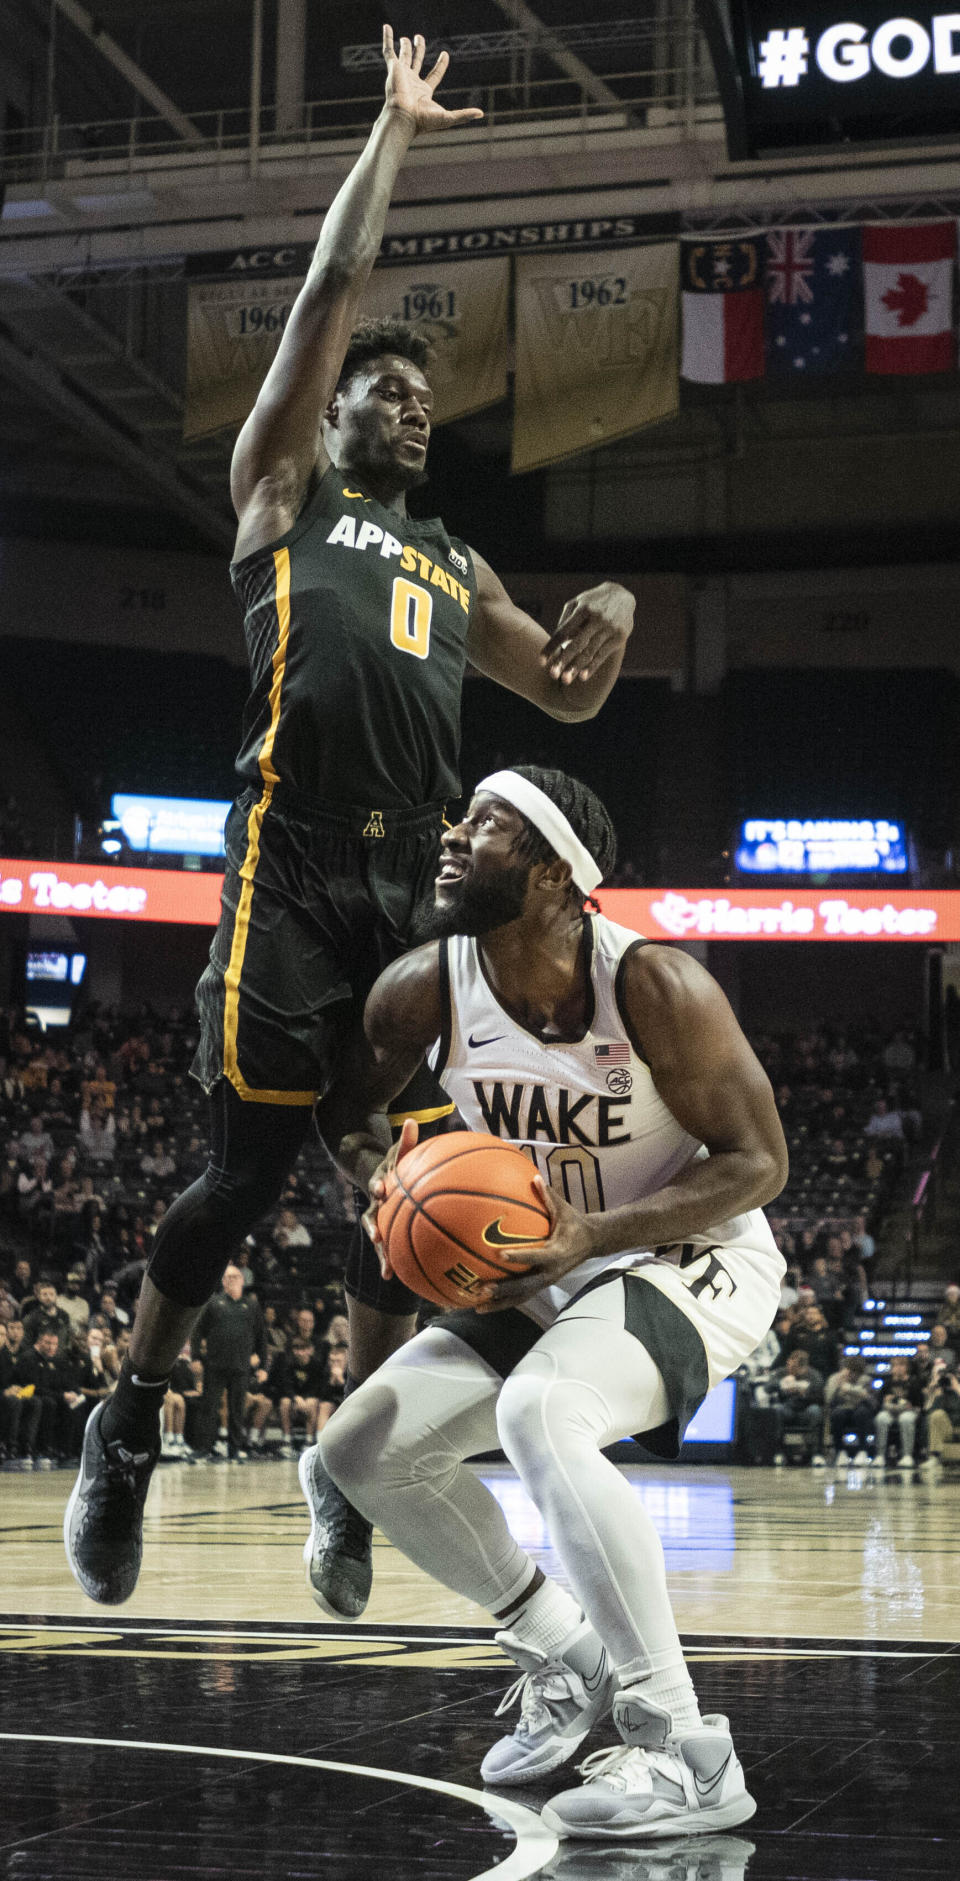 Appalachian State guard Xavion Brown (0) applies pressure to Wake Forest guard Jao Ituka (10) in the first half of an NCAA college basketball game on Wednesday, Dec. 14, 2022, at Joel Coliseum in Winston-Salem, N.C. (Allison Lee Isley/The Winston-Salem Journal via AP)